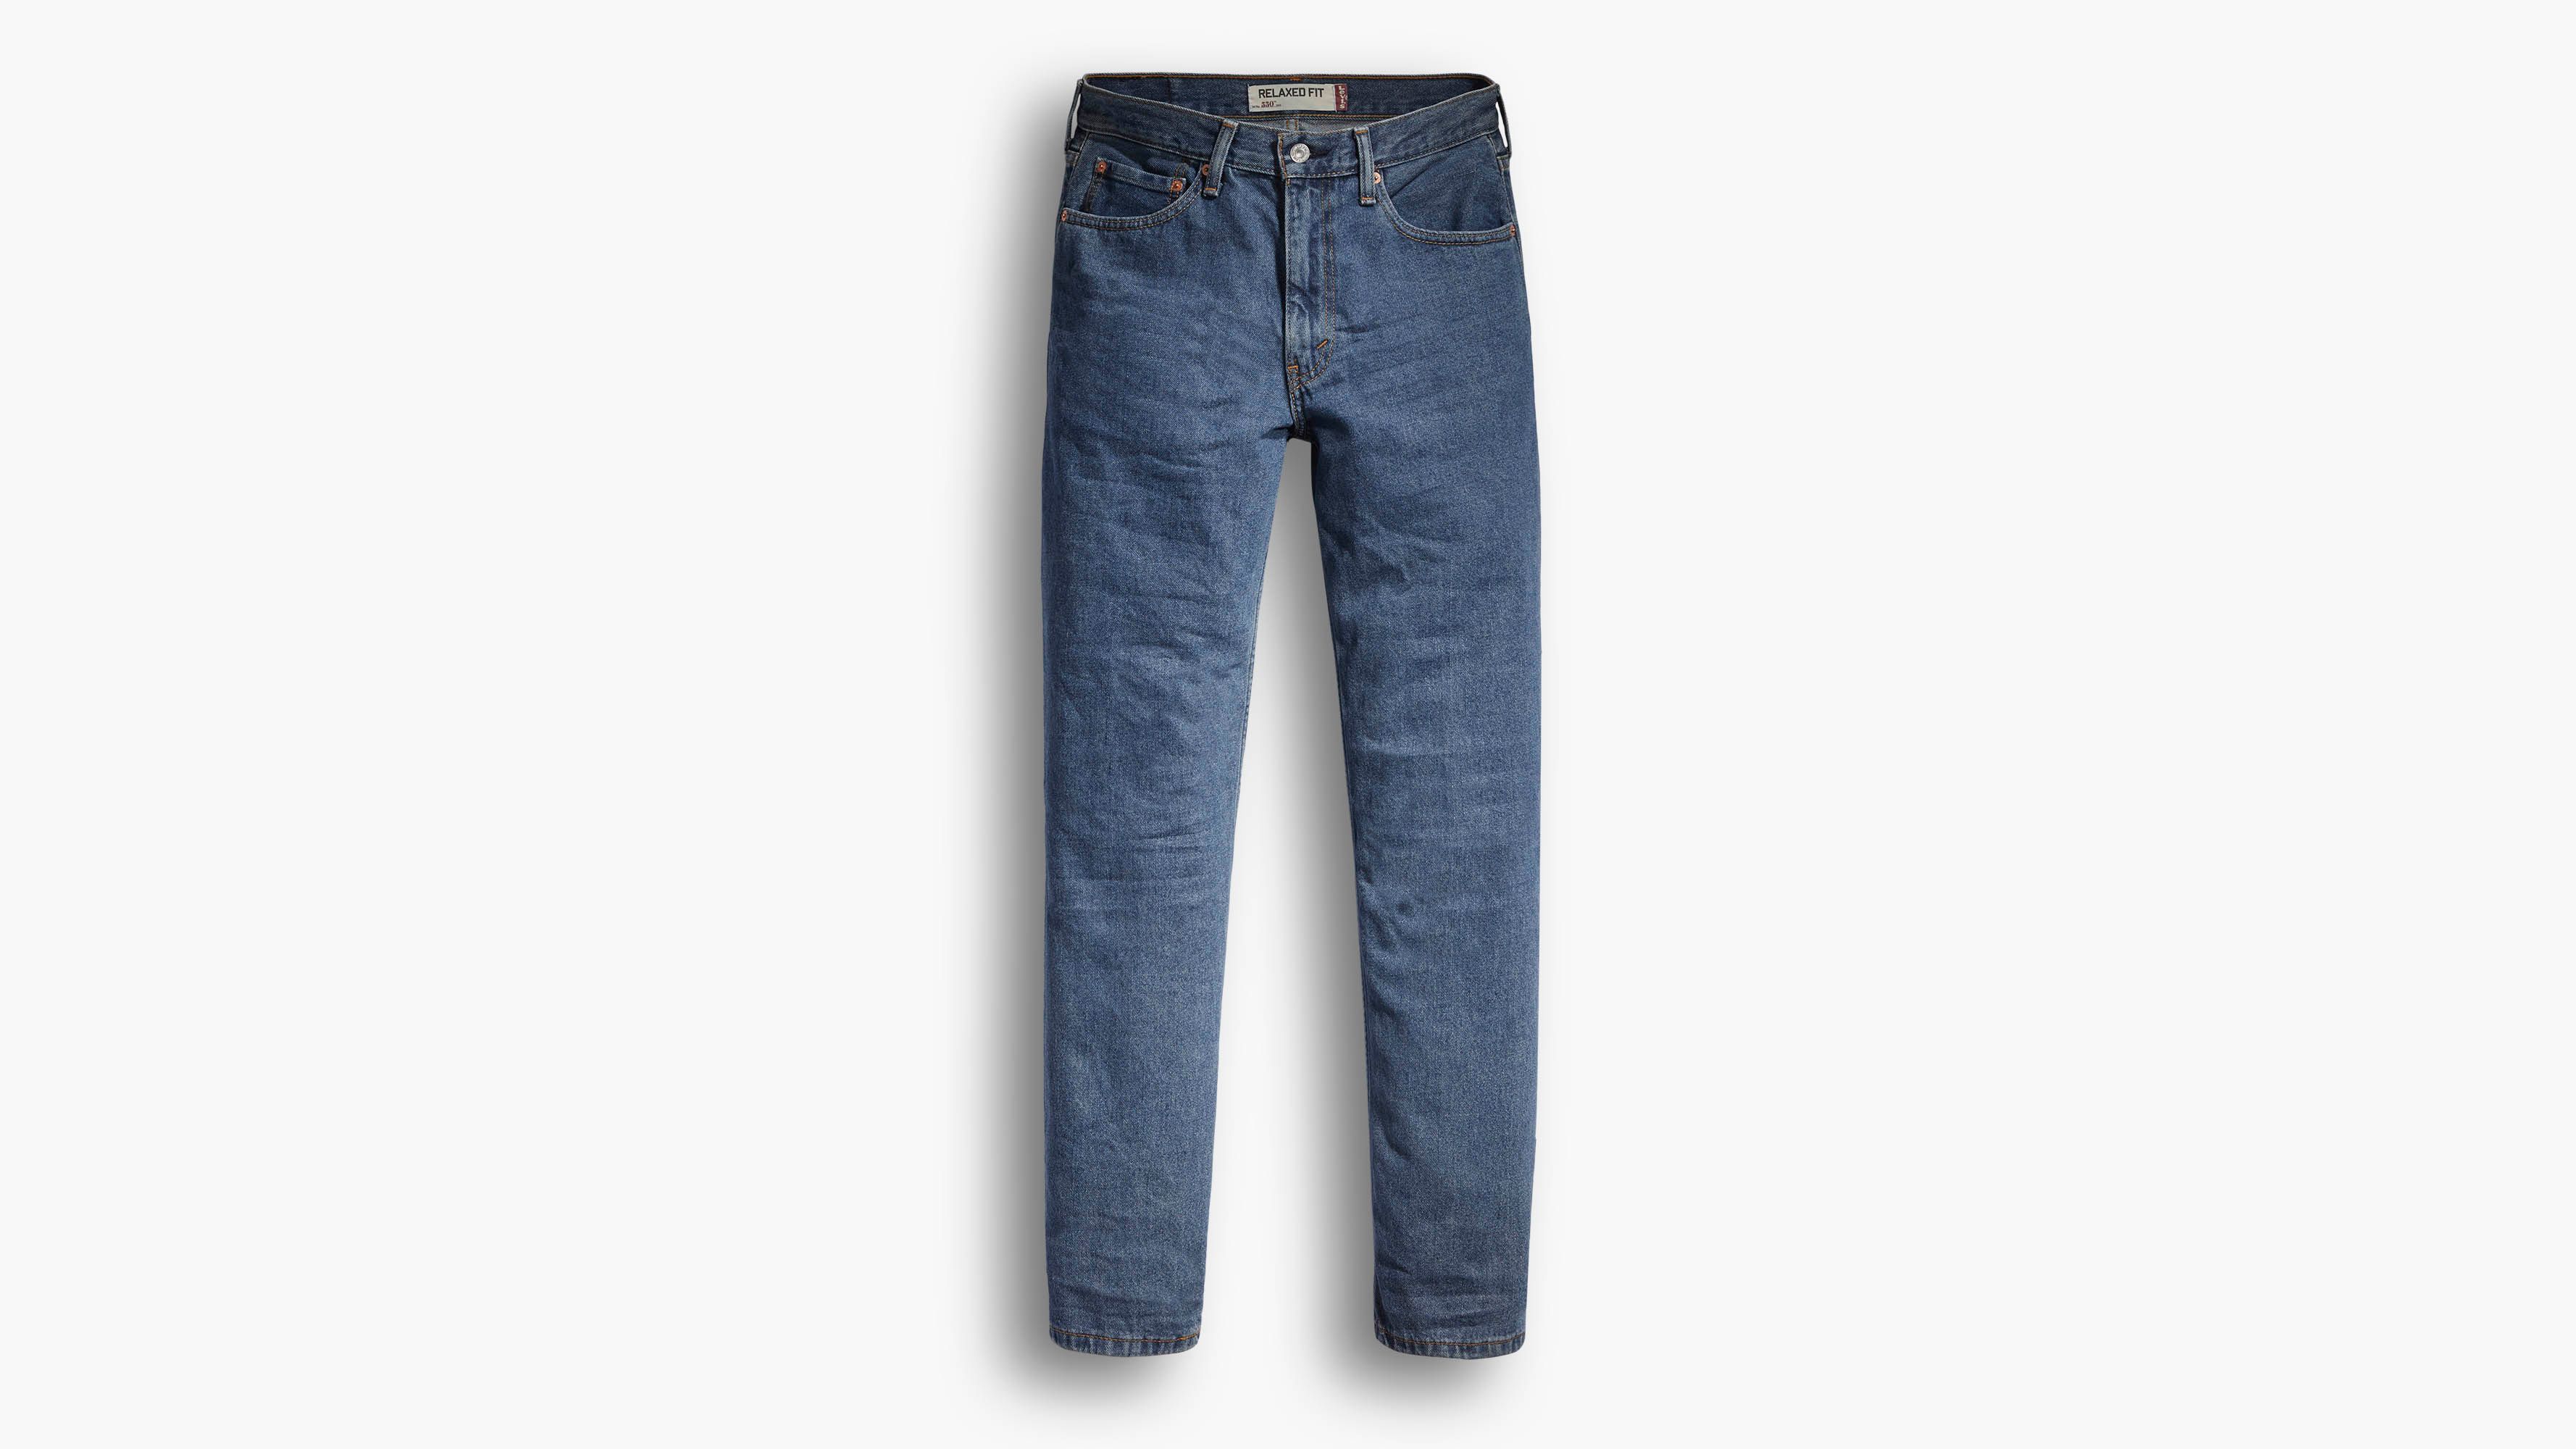 550™ Relaxed Fit Men's Jeans Dark Wash | Levi's®